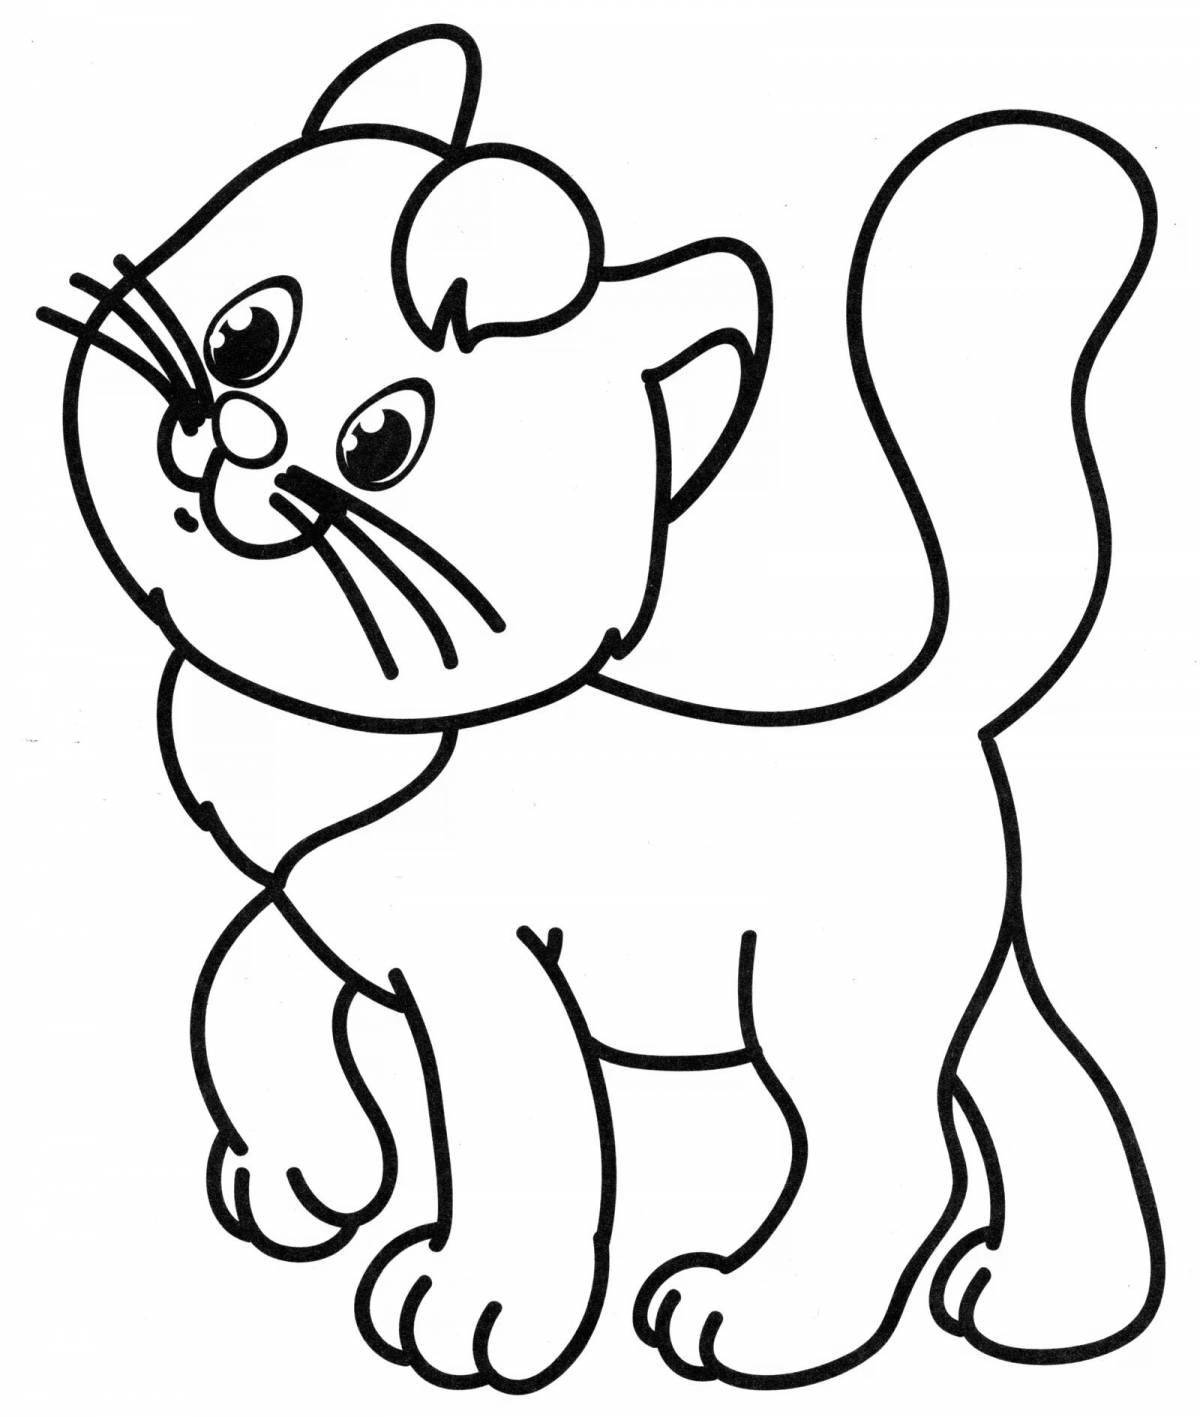 Bright cat coloring for kids